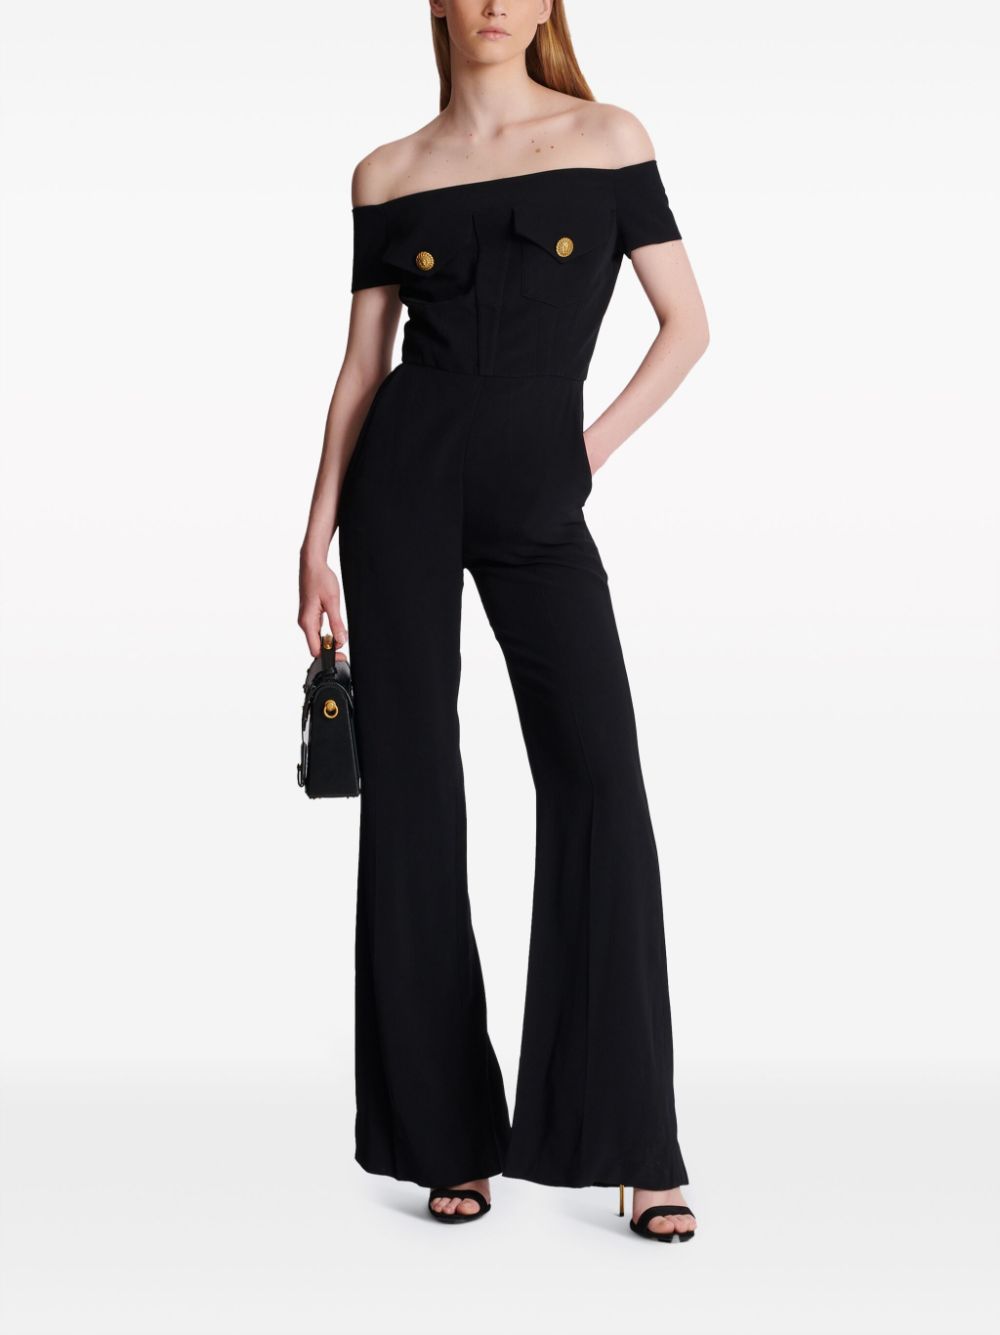 Shop Balmain Stunning Black Jumpsuit With Jewel Accents For Women